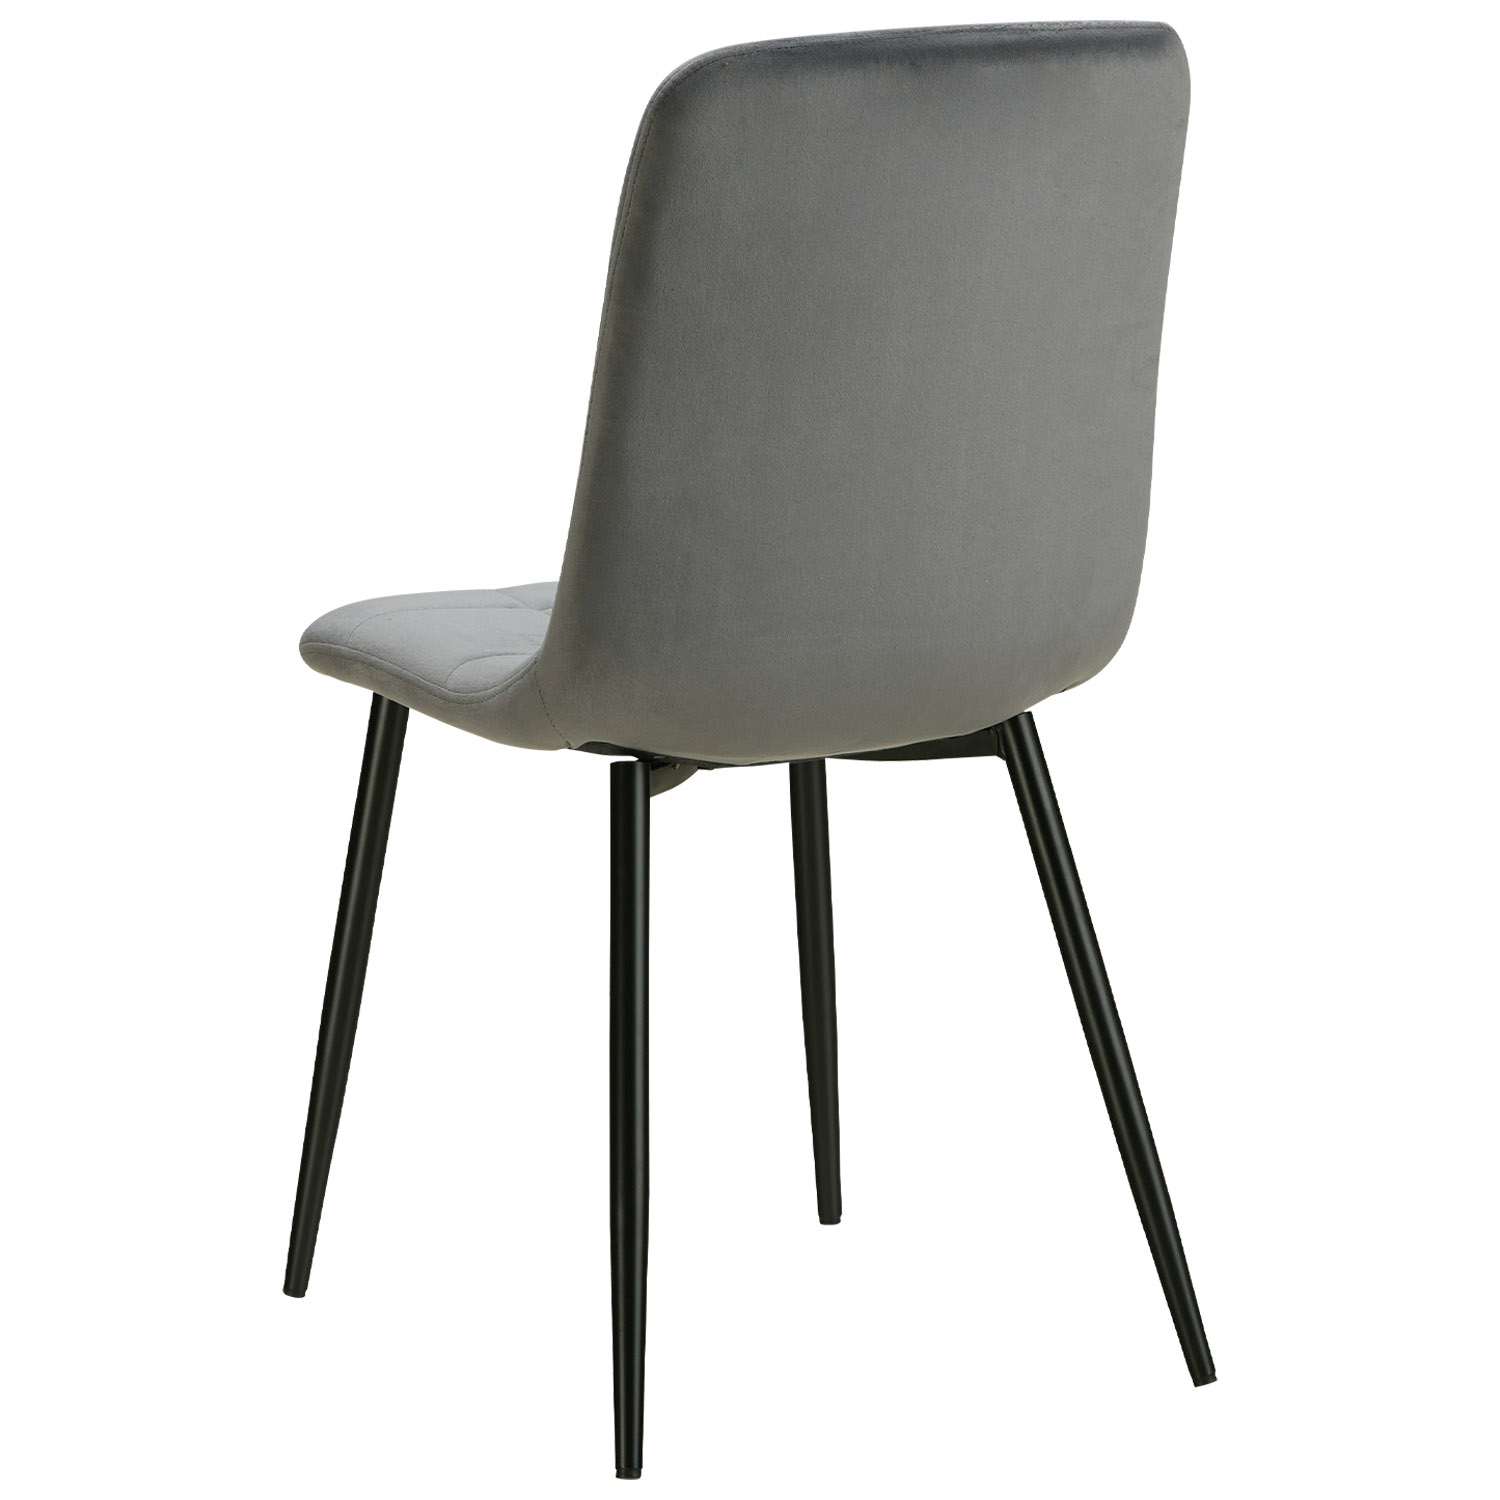 Dining Chair Set of 2 Egg Chairs Grey Armchairs Dining Room Chairs Upholstered Chairs Eames Chairs